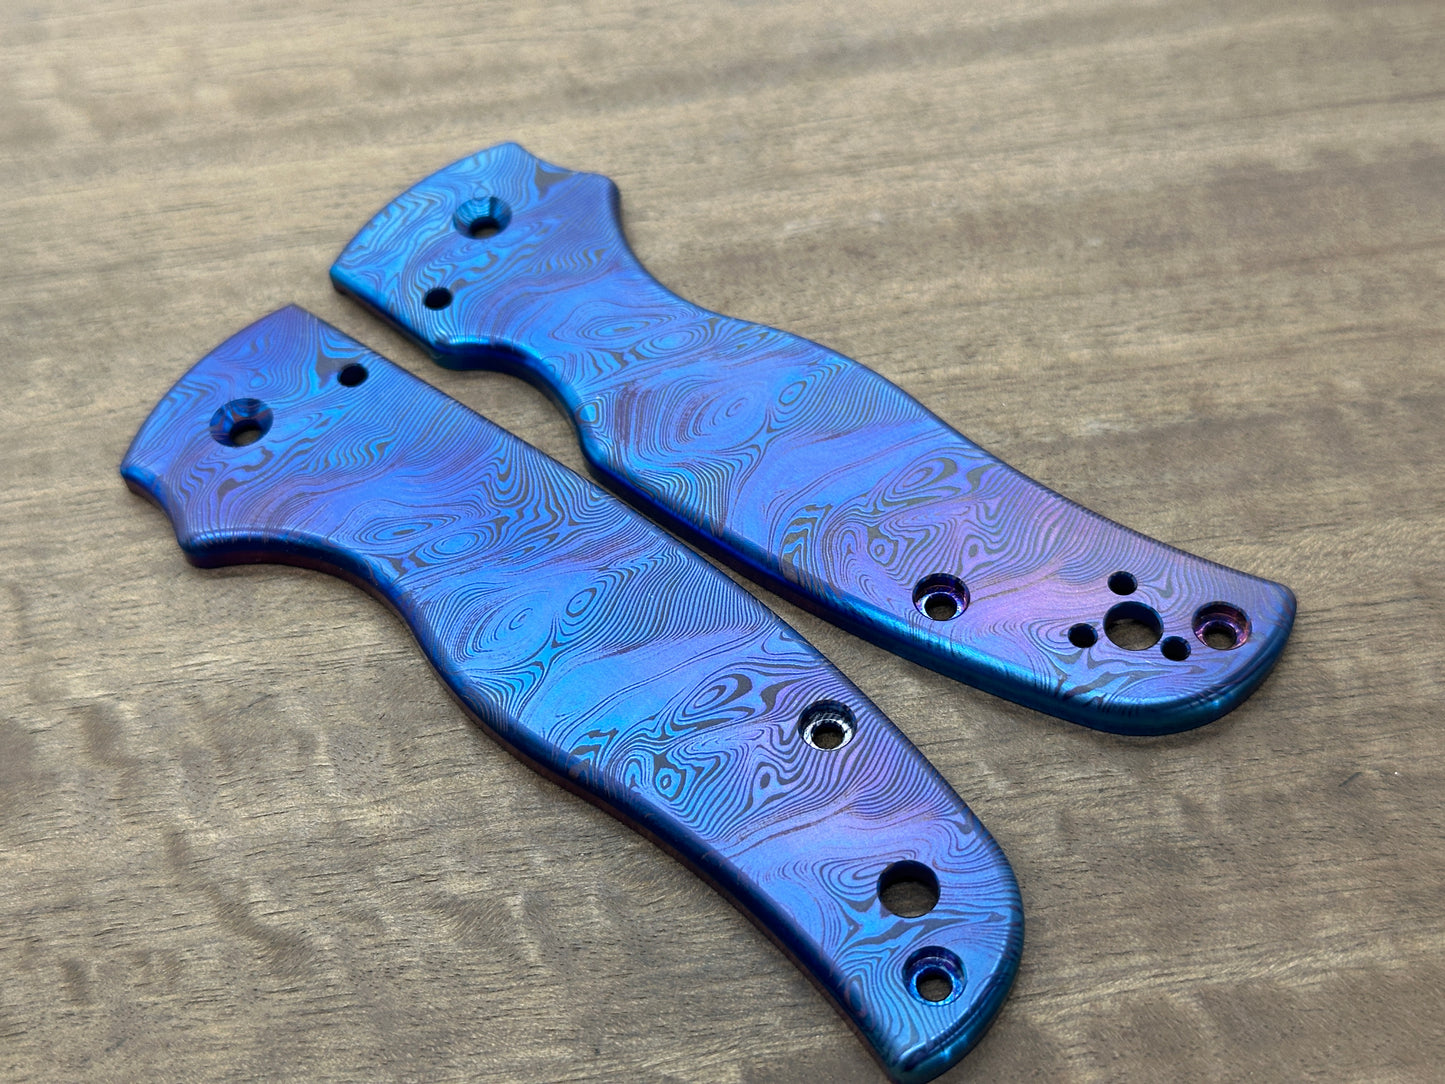 Dama TWIST Flamed pattern engraved Titanium Scales for SHAMAN Spyderco